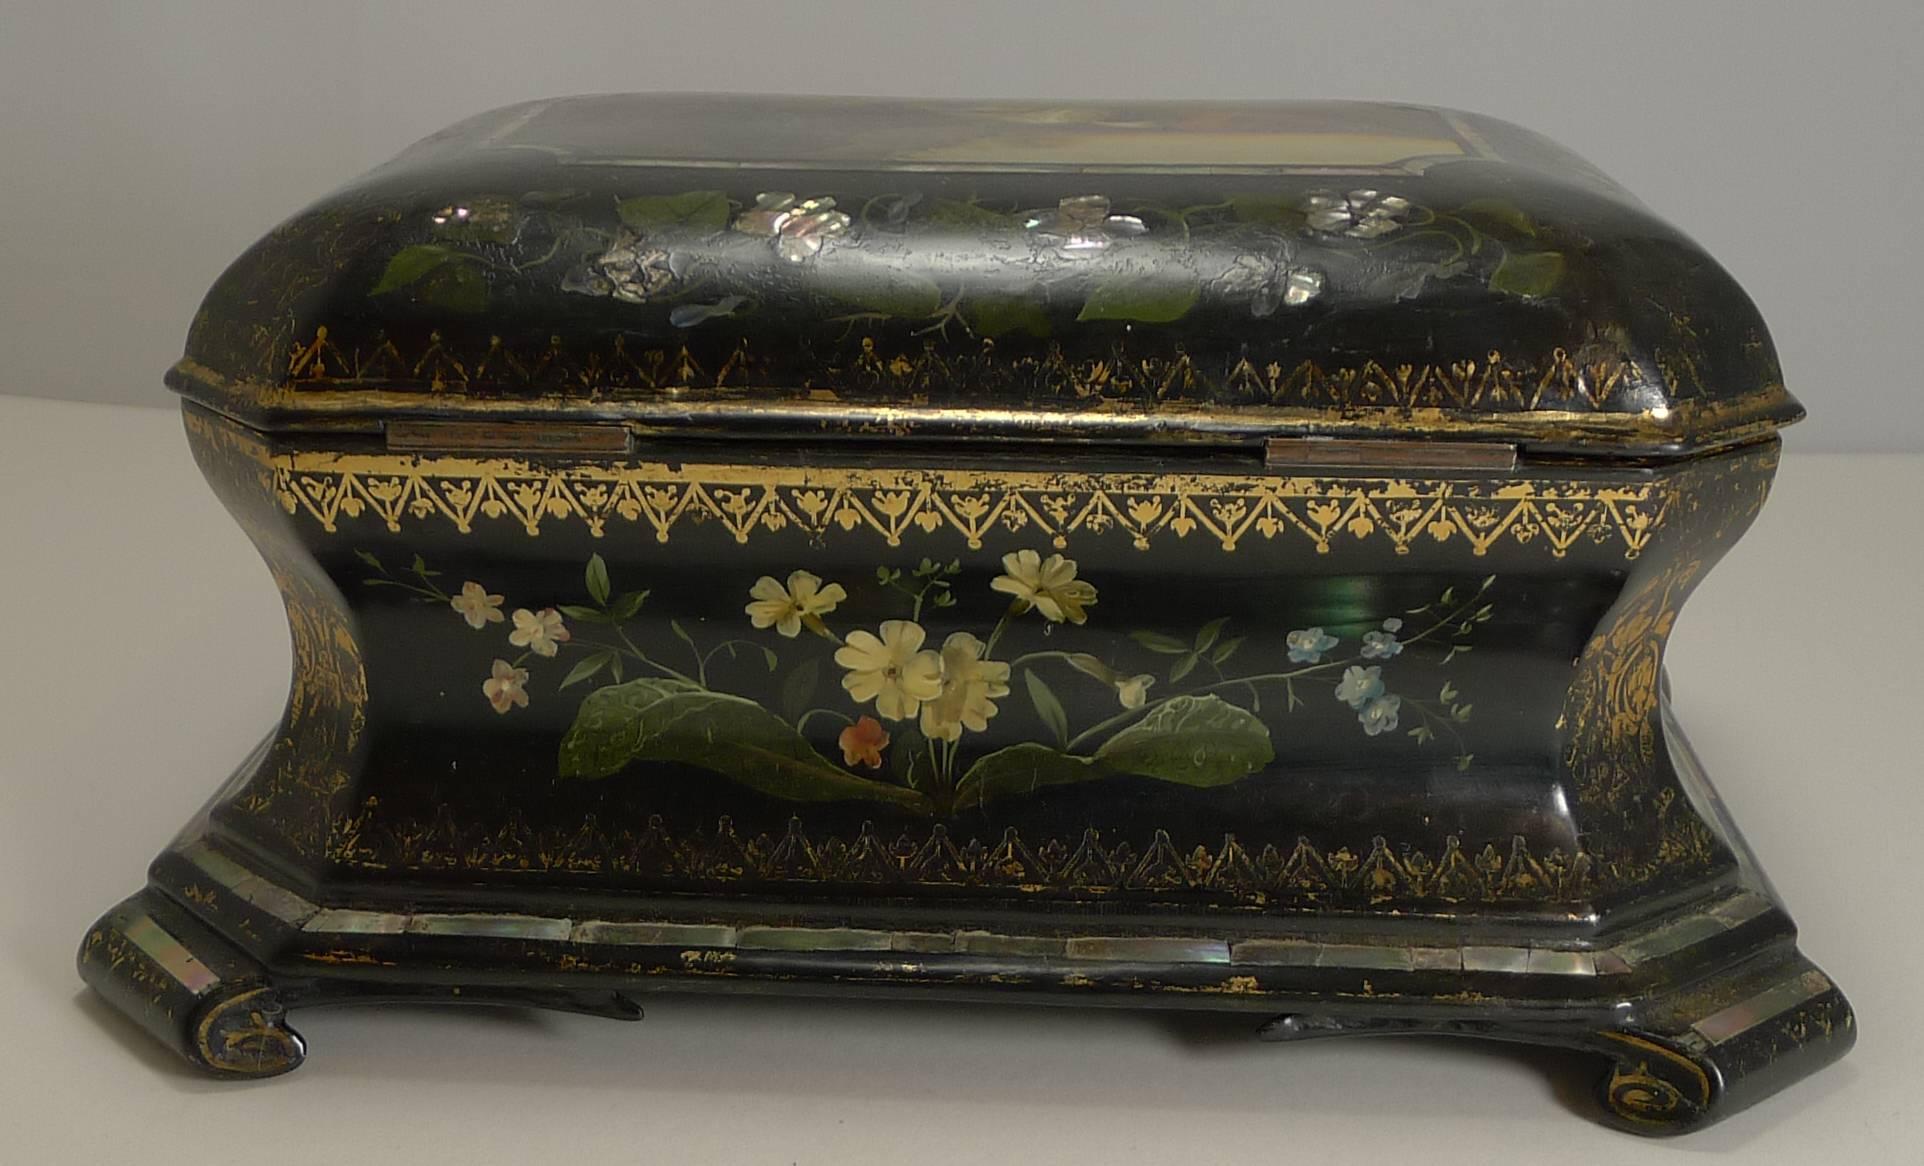 An exquisite and quite charming jewelry box dating to circa 1860 and made from lacquered papier mâché by the most famous of English makers, Jennens and Bettridge, signed on the underside 